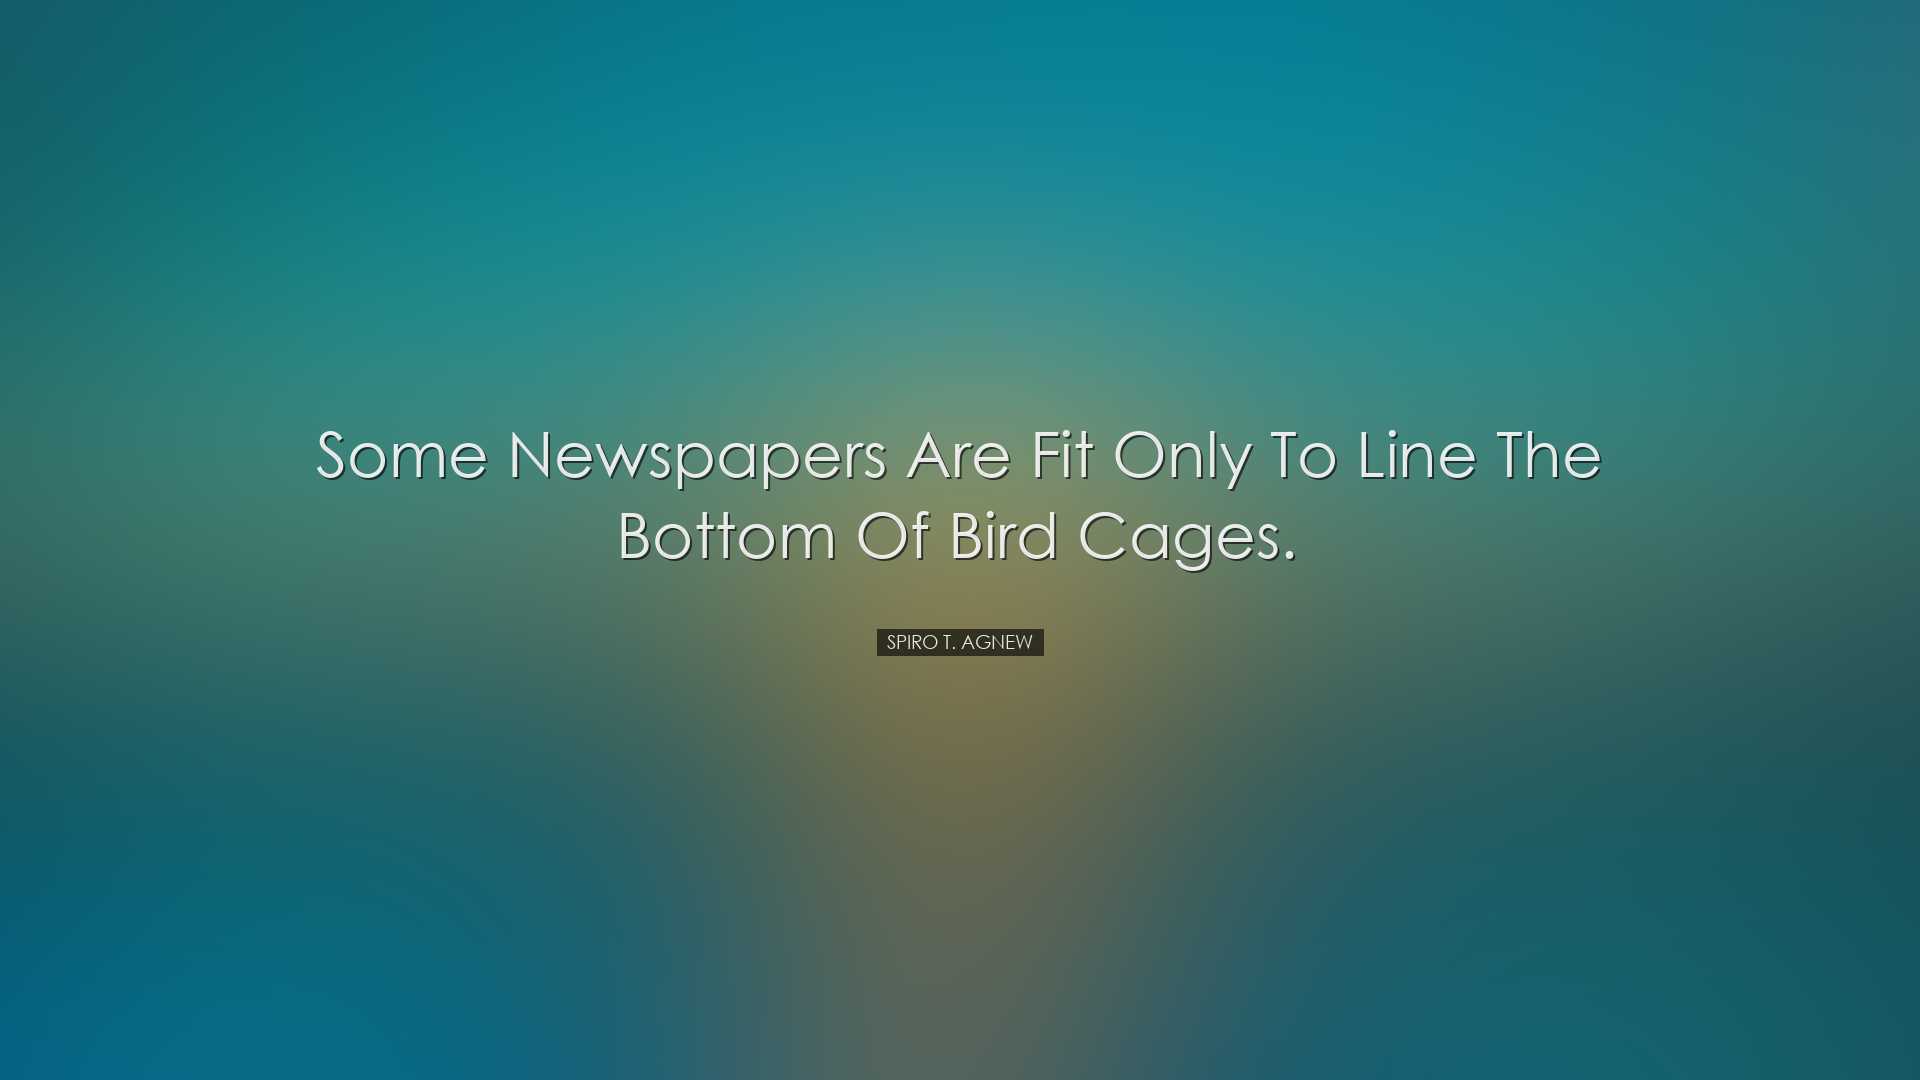 Some newspapers are fit only to line the bottom of bird cages. - S